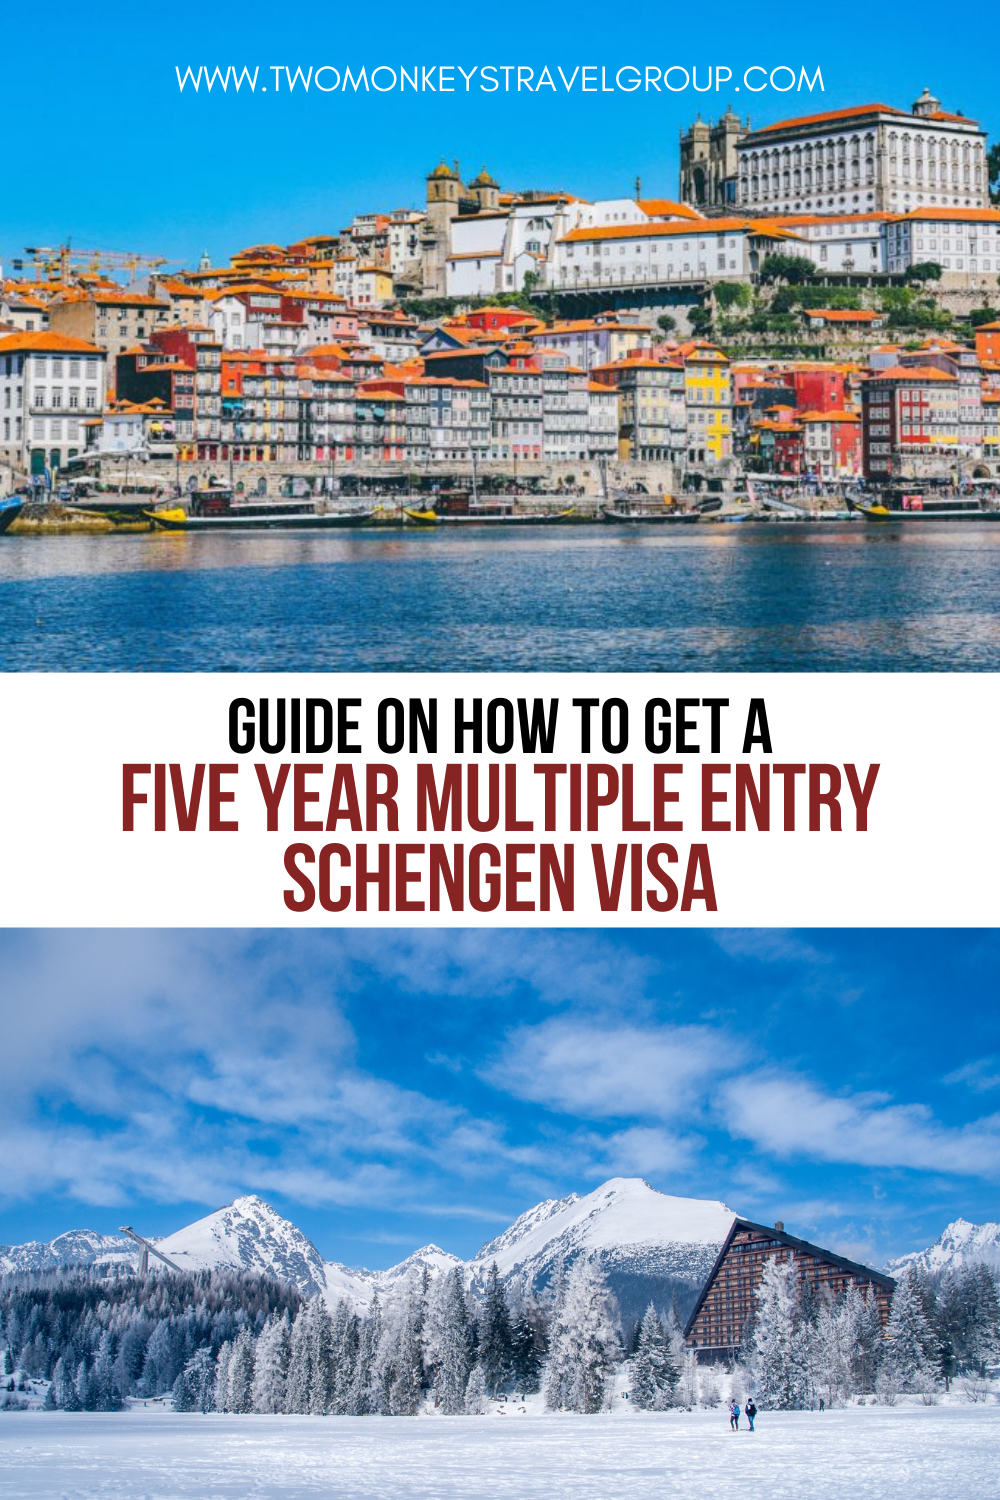 How to Get a Five Year Multiple Entry Schengen Visa for Filipino Citizens